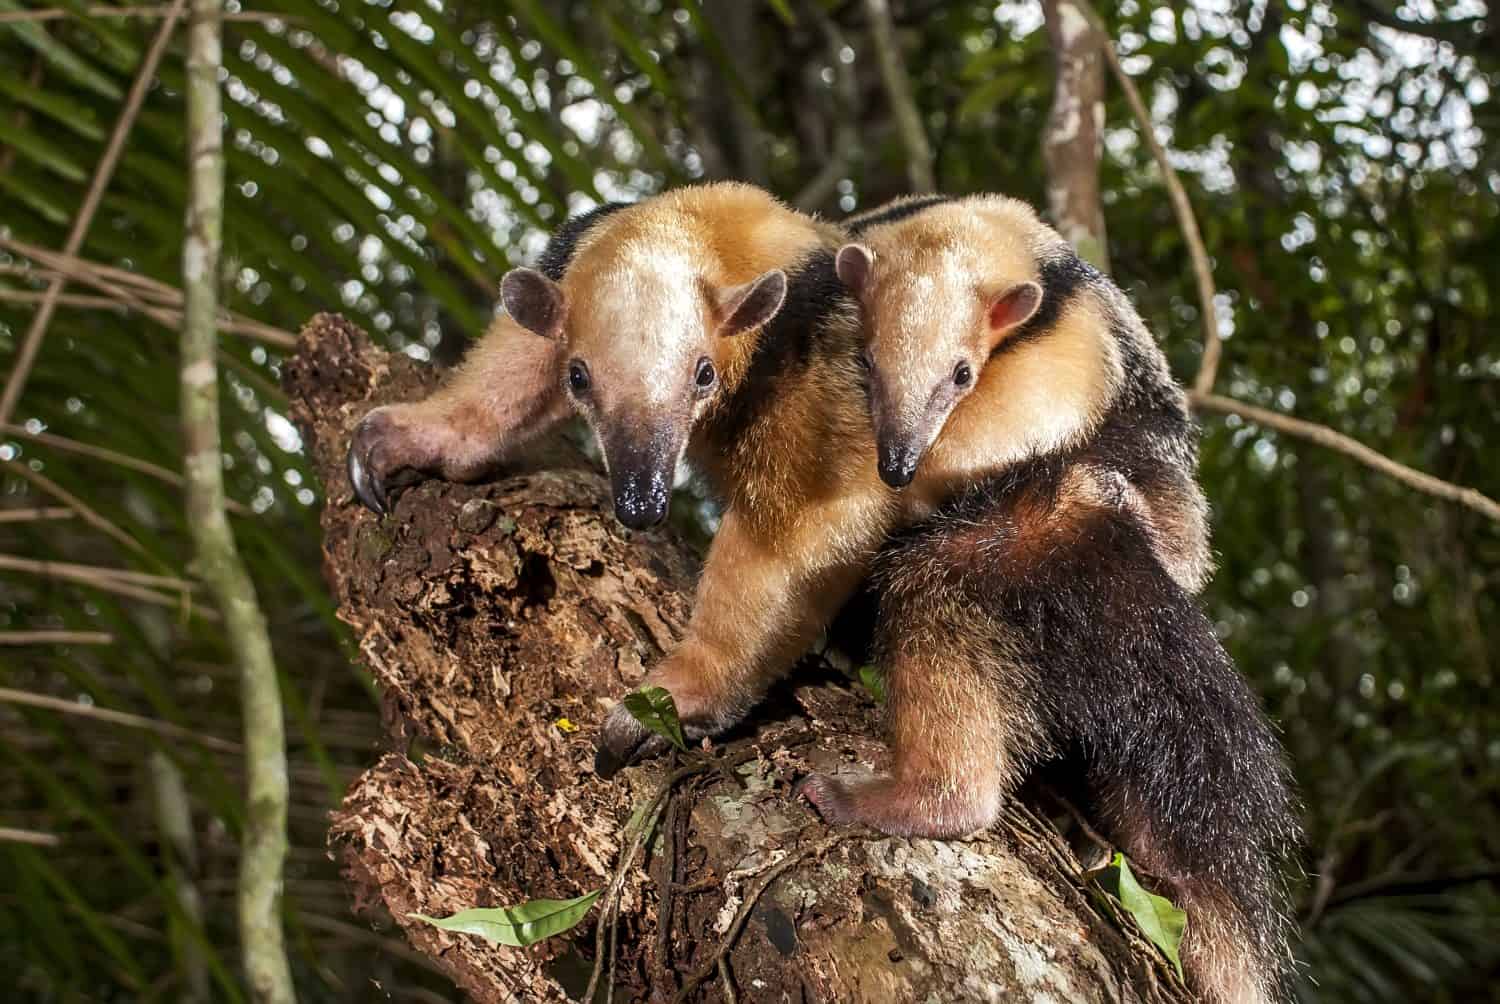 A mother anteater carries her baby on the back.